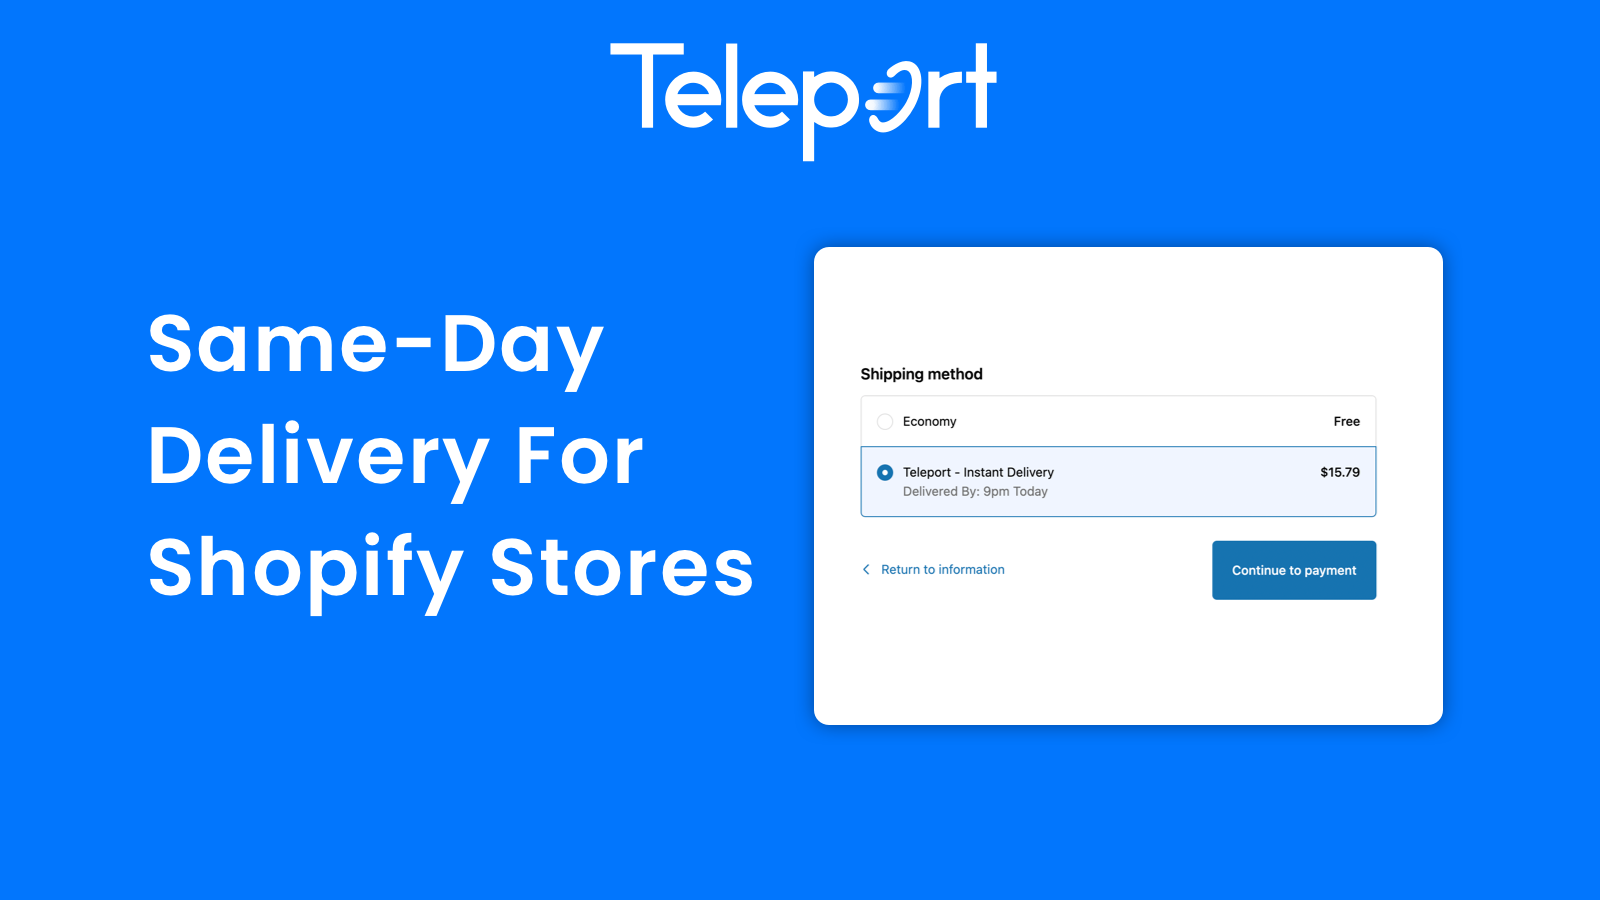 The Shopify checkout with Teleport as a shipping method